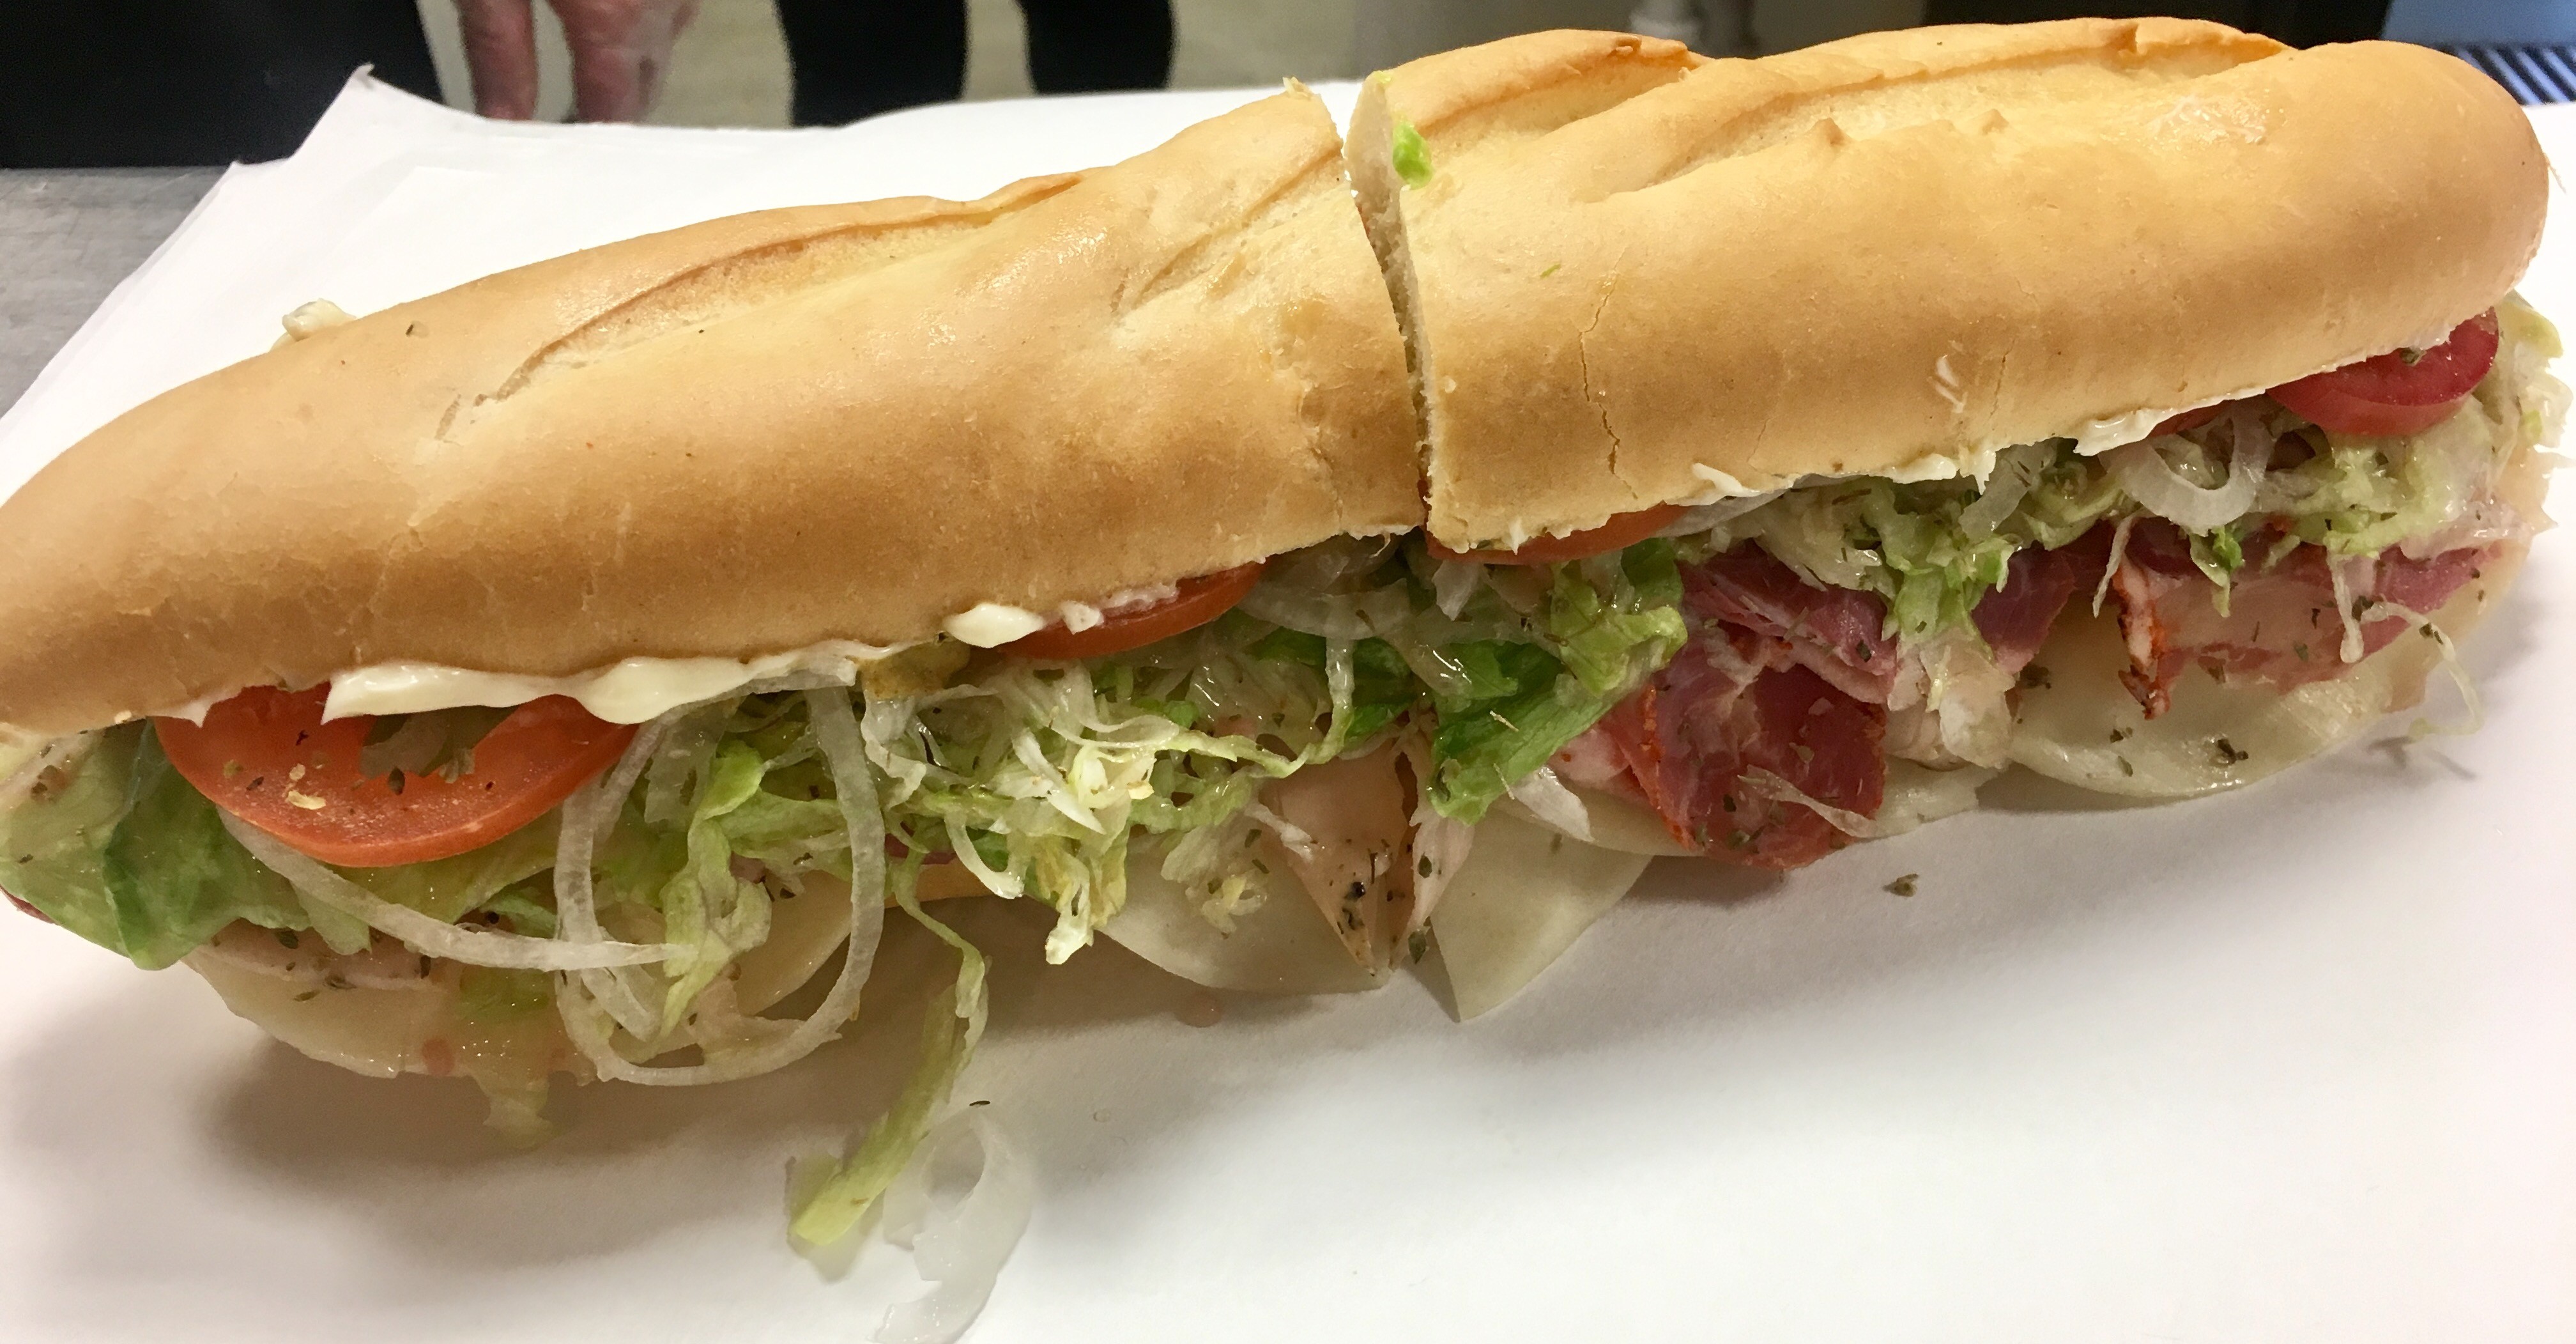 New York Sub, A Dallas Sandwich Shop Staple, is Better Than Ever After